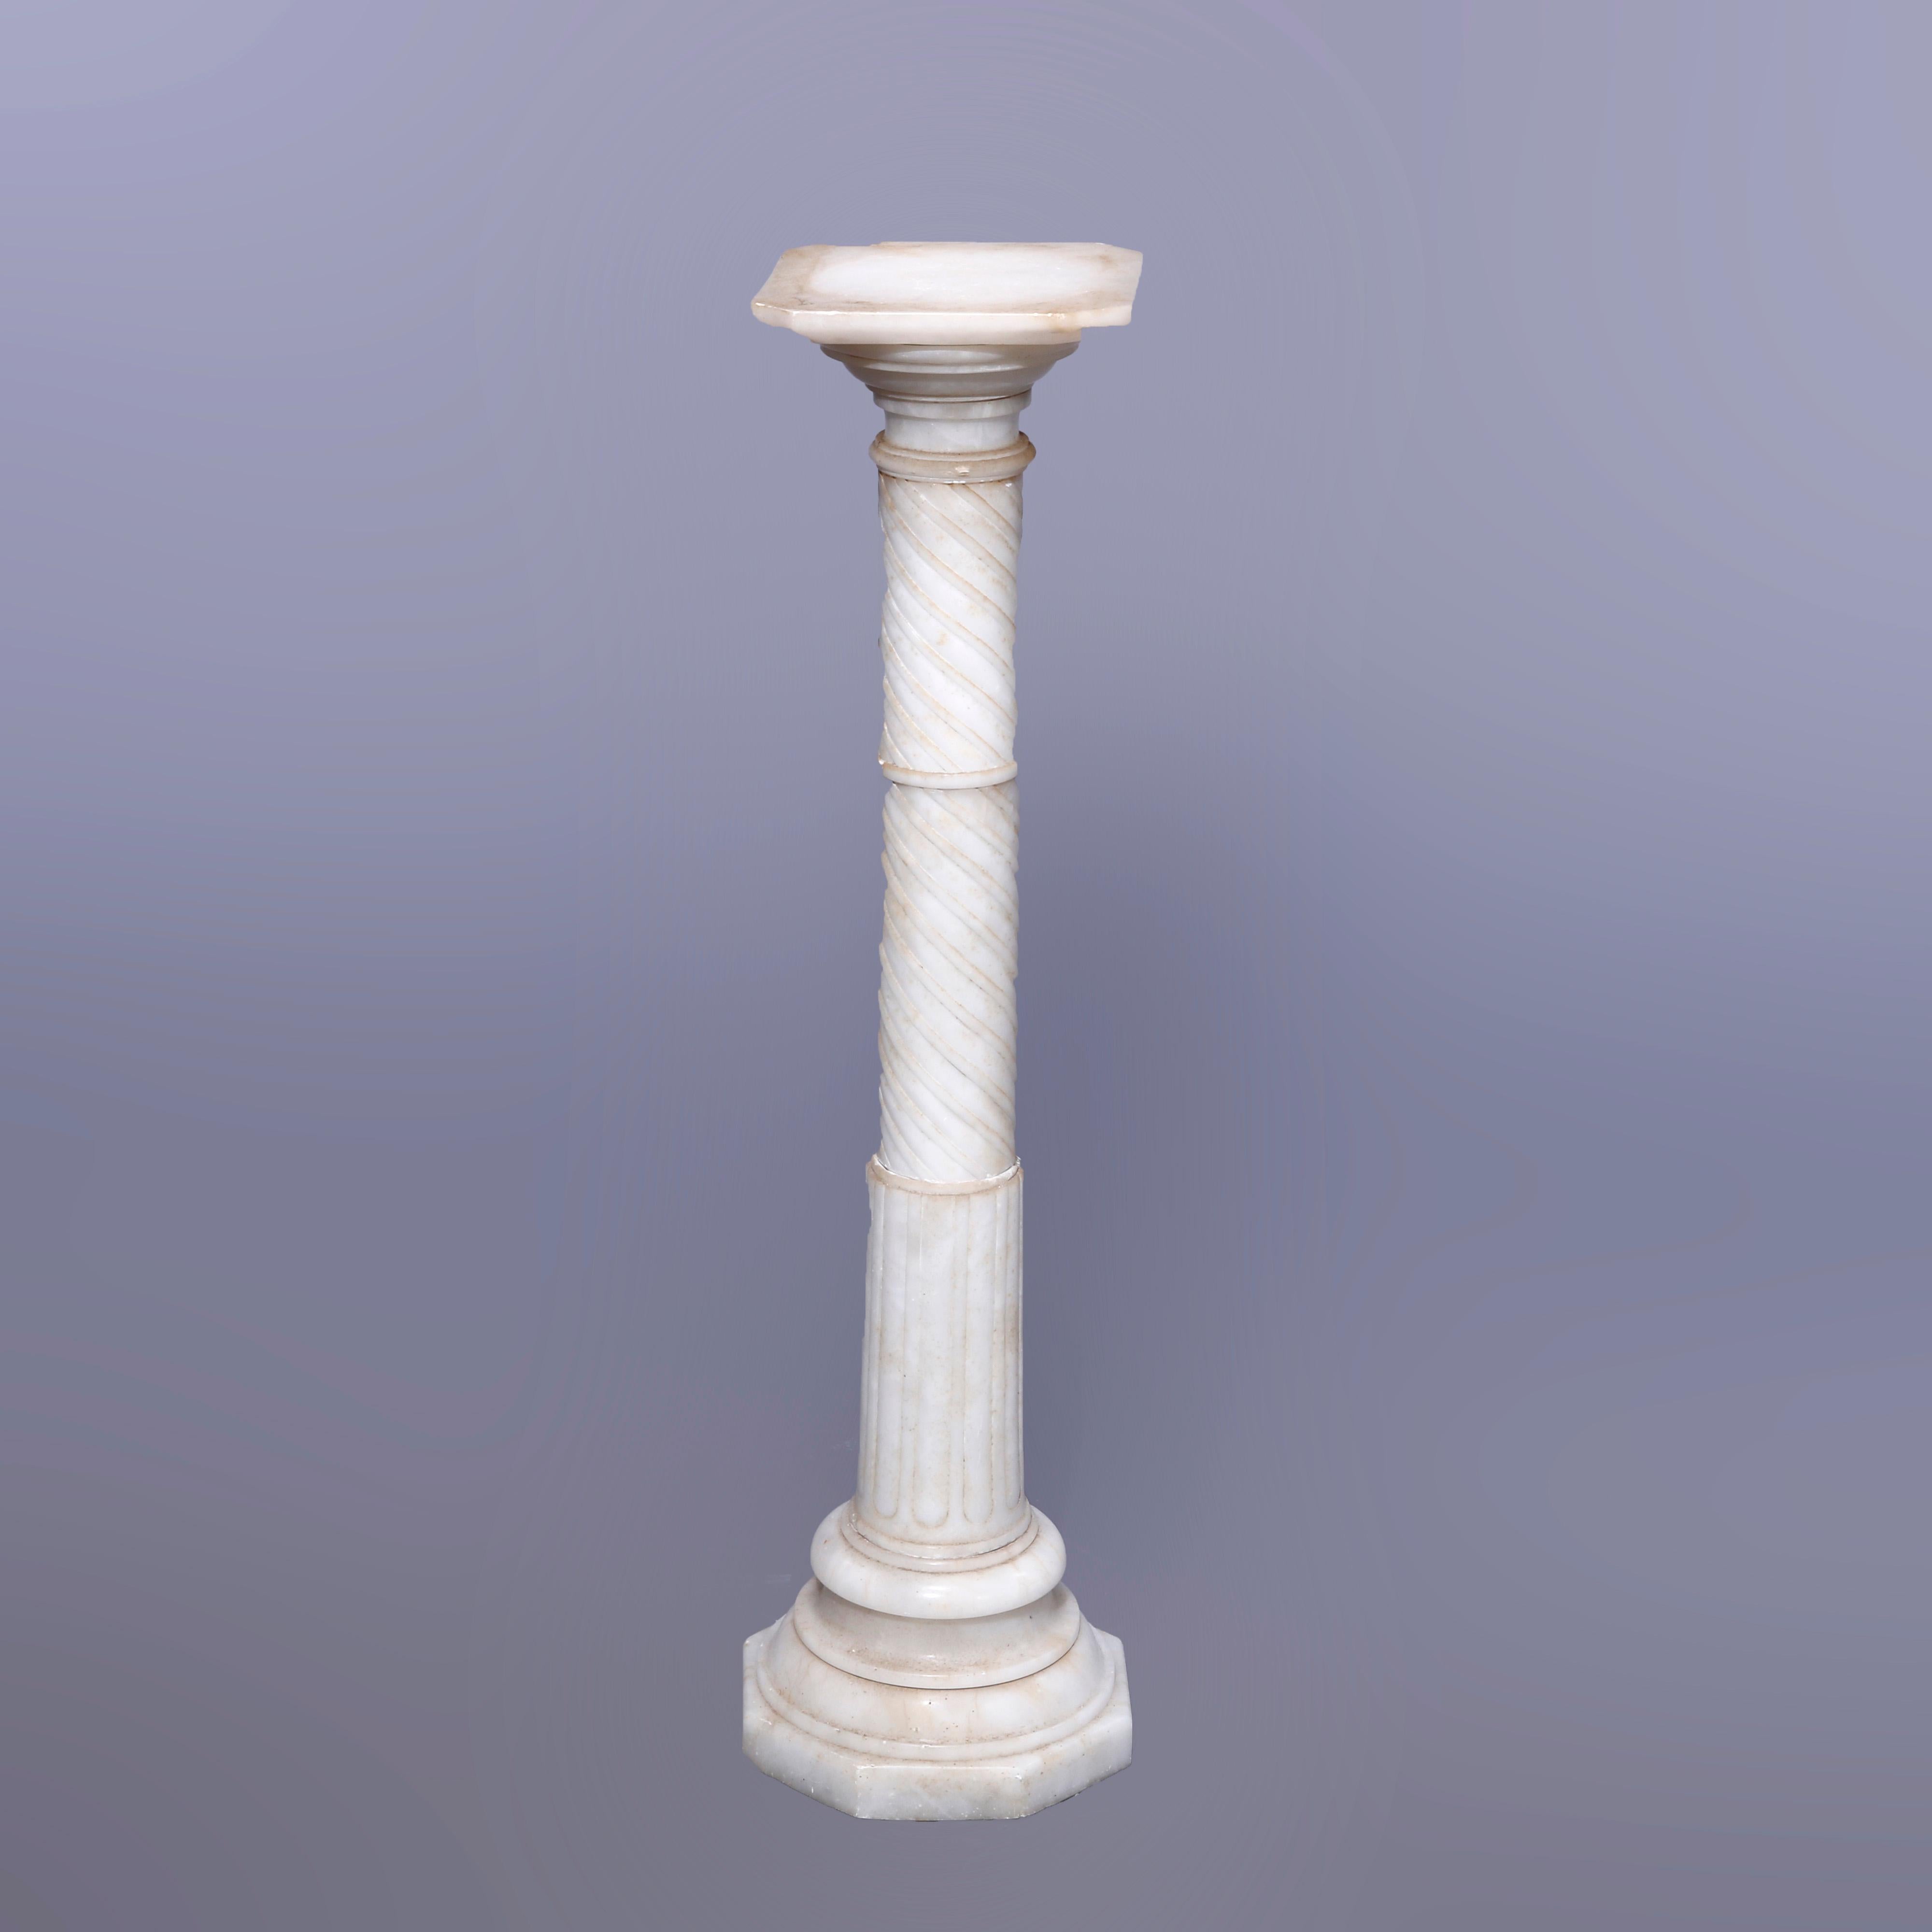 19th Century Antique Neoclassical Carved Alabaster Sculpture Pedestal, Rope Twist Form, 1890 For Sale